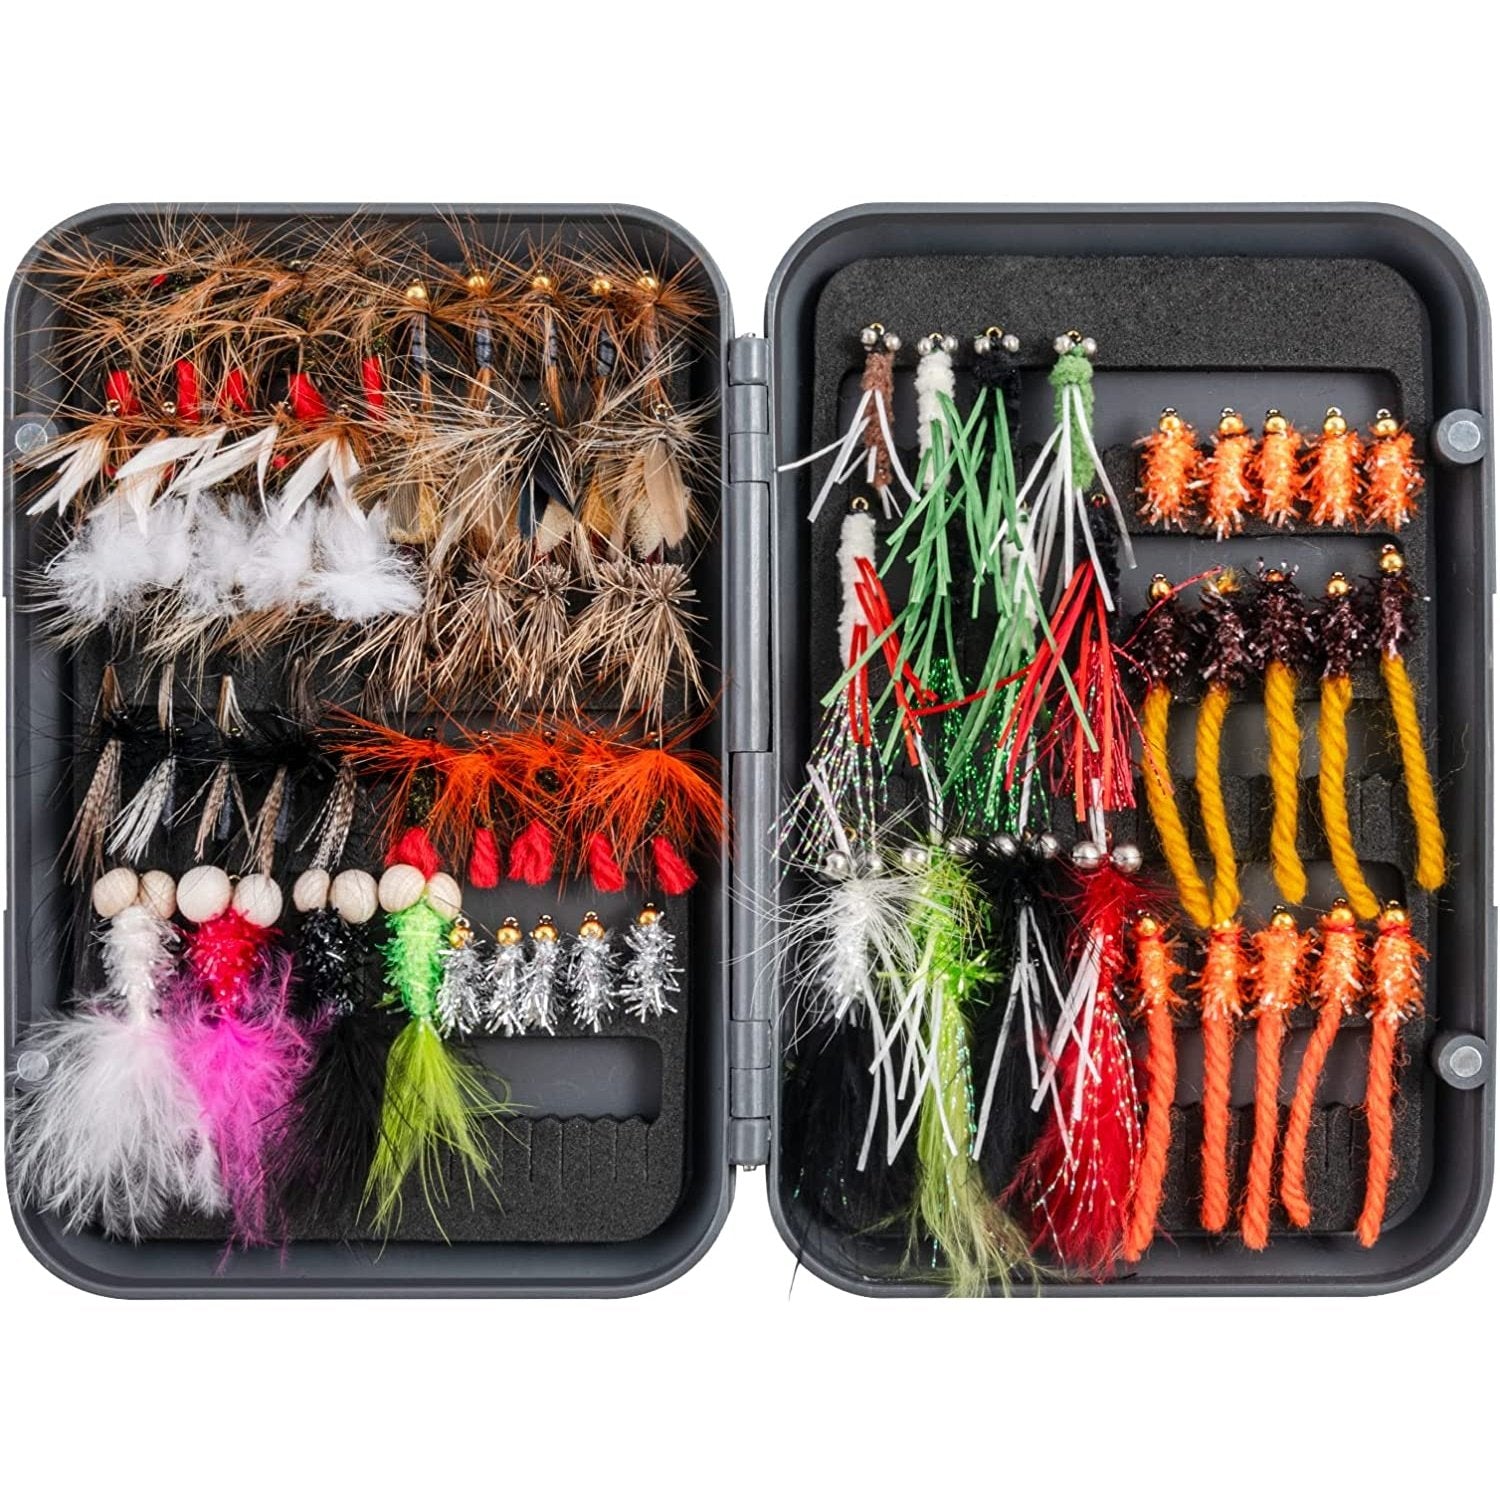 Pro Angler's Ultimate Fly Fishing Flies Kit - Premium Hand-Tied Lures for  Trout, Bass, Salmon, and More - 76PCS